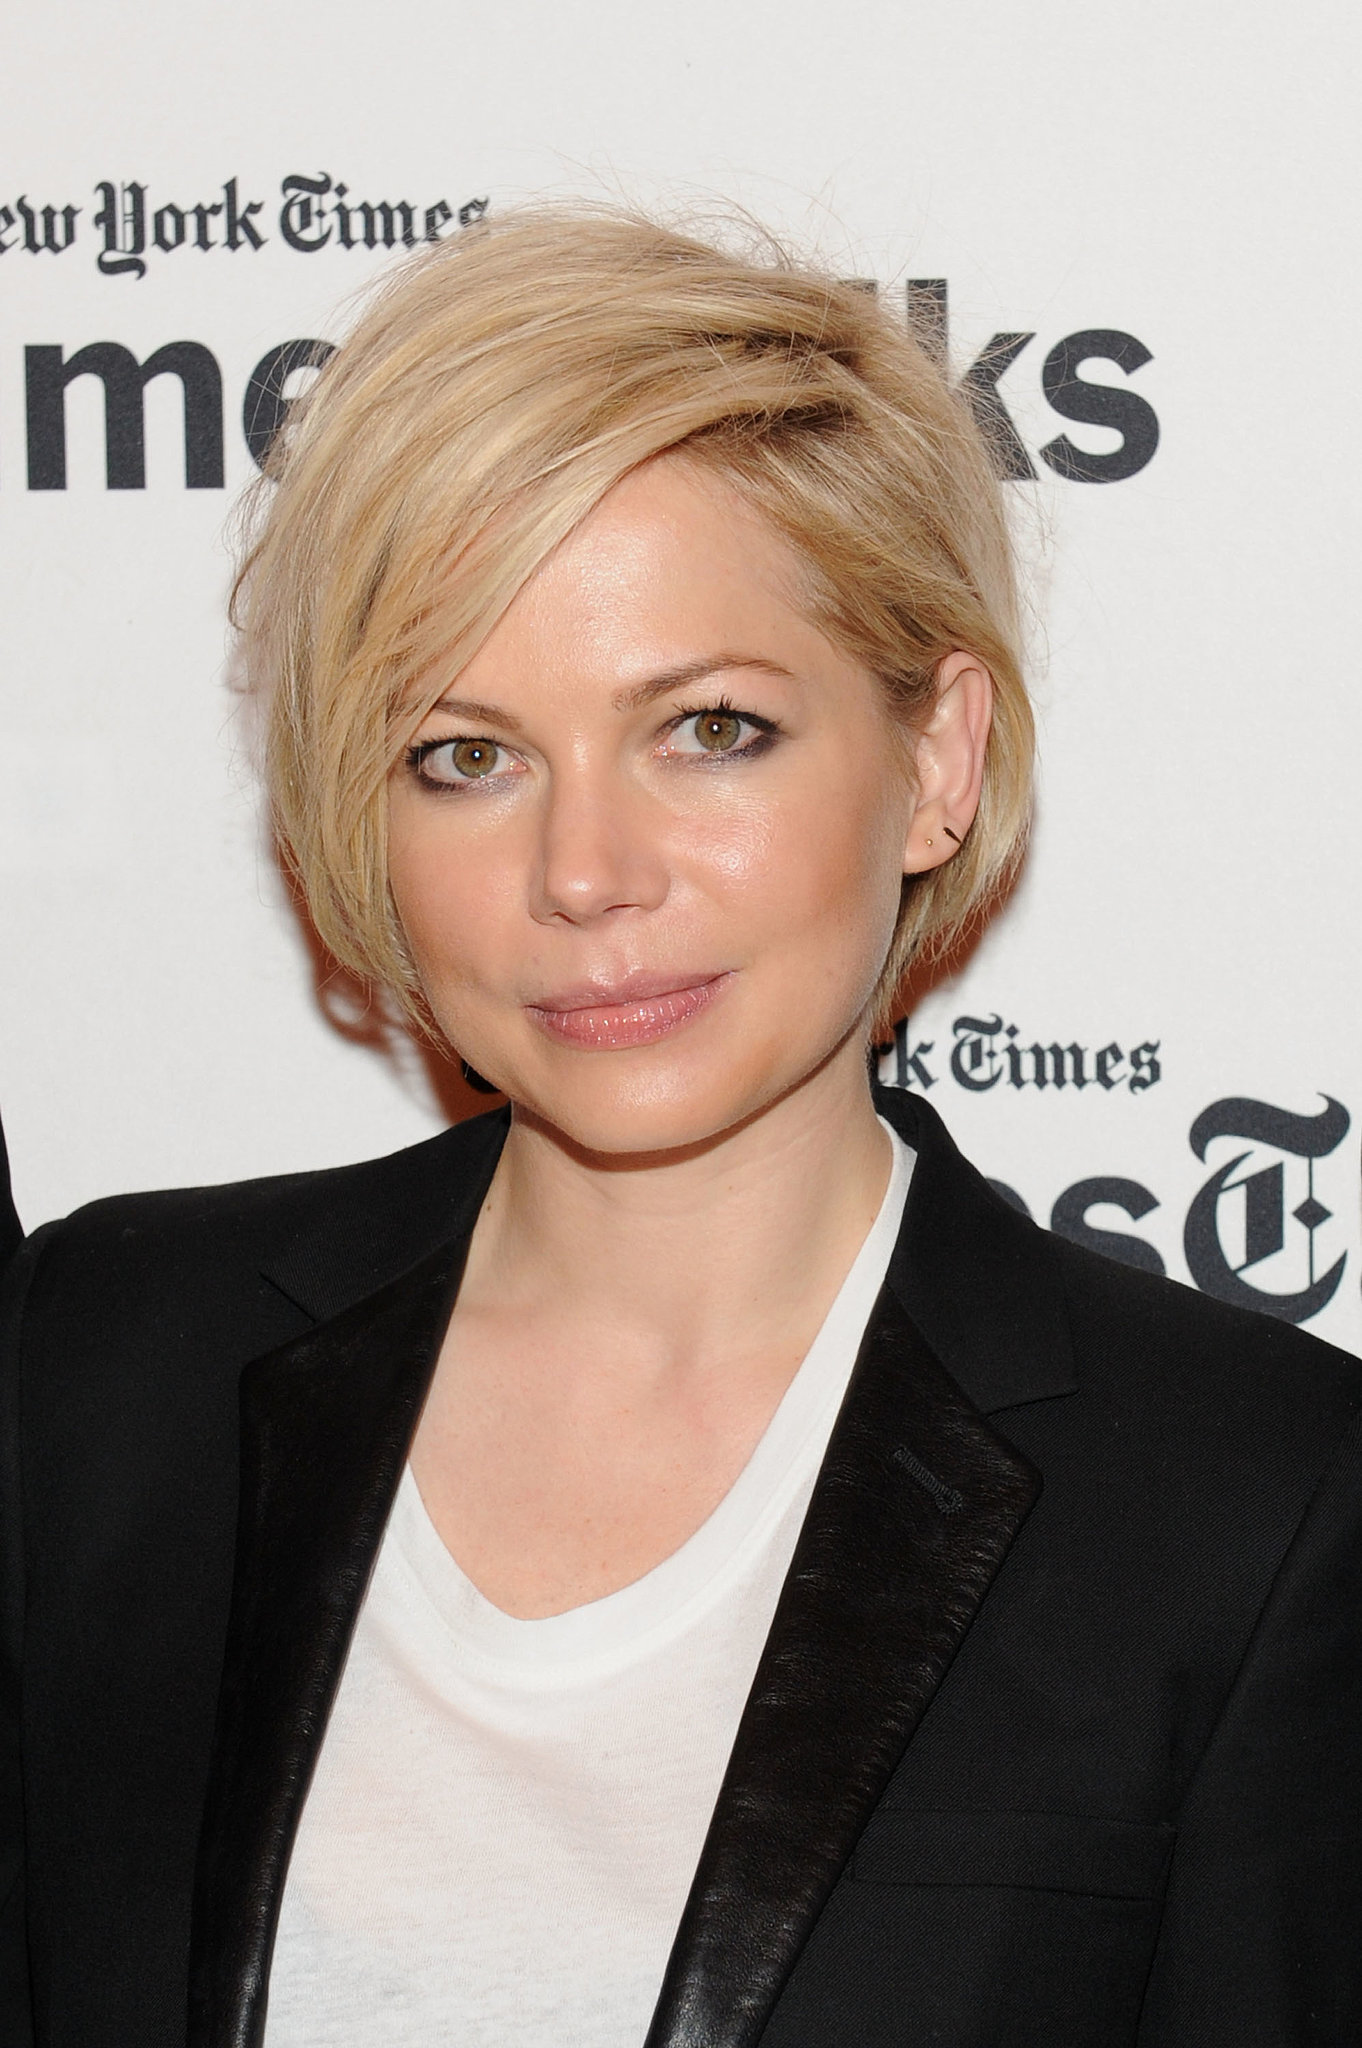 Michelle Williams Grown-Out Hair February 2014 | POPSUGAR Beauty